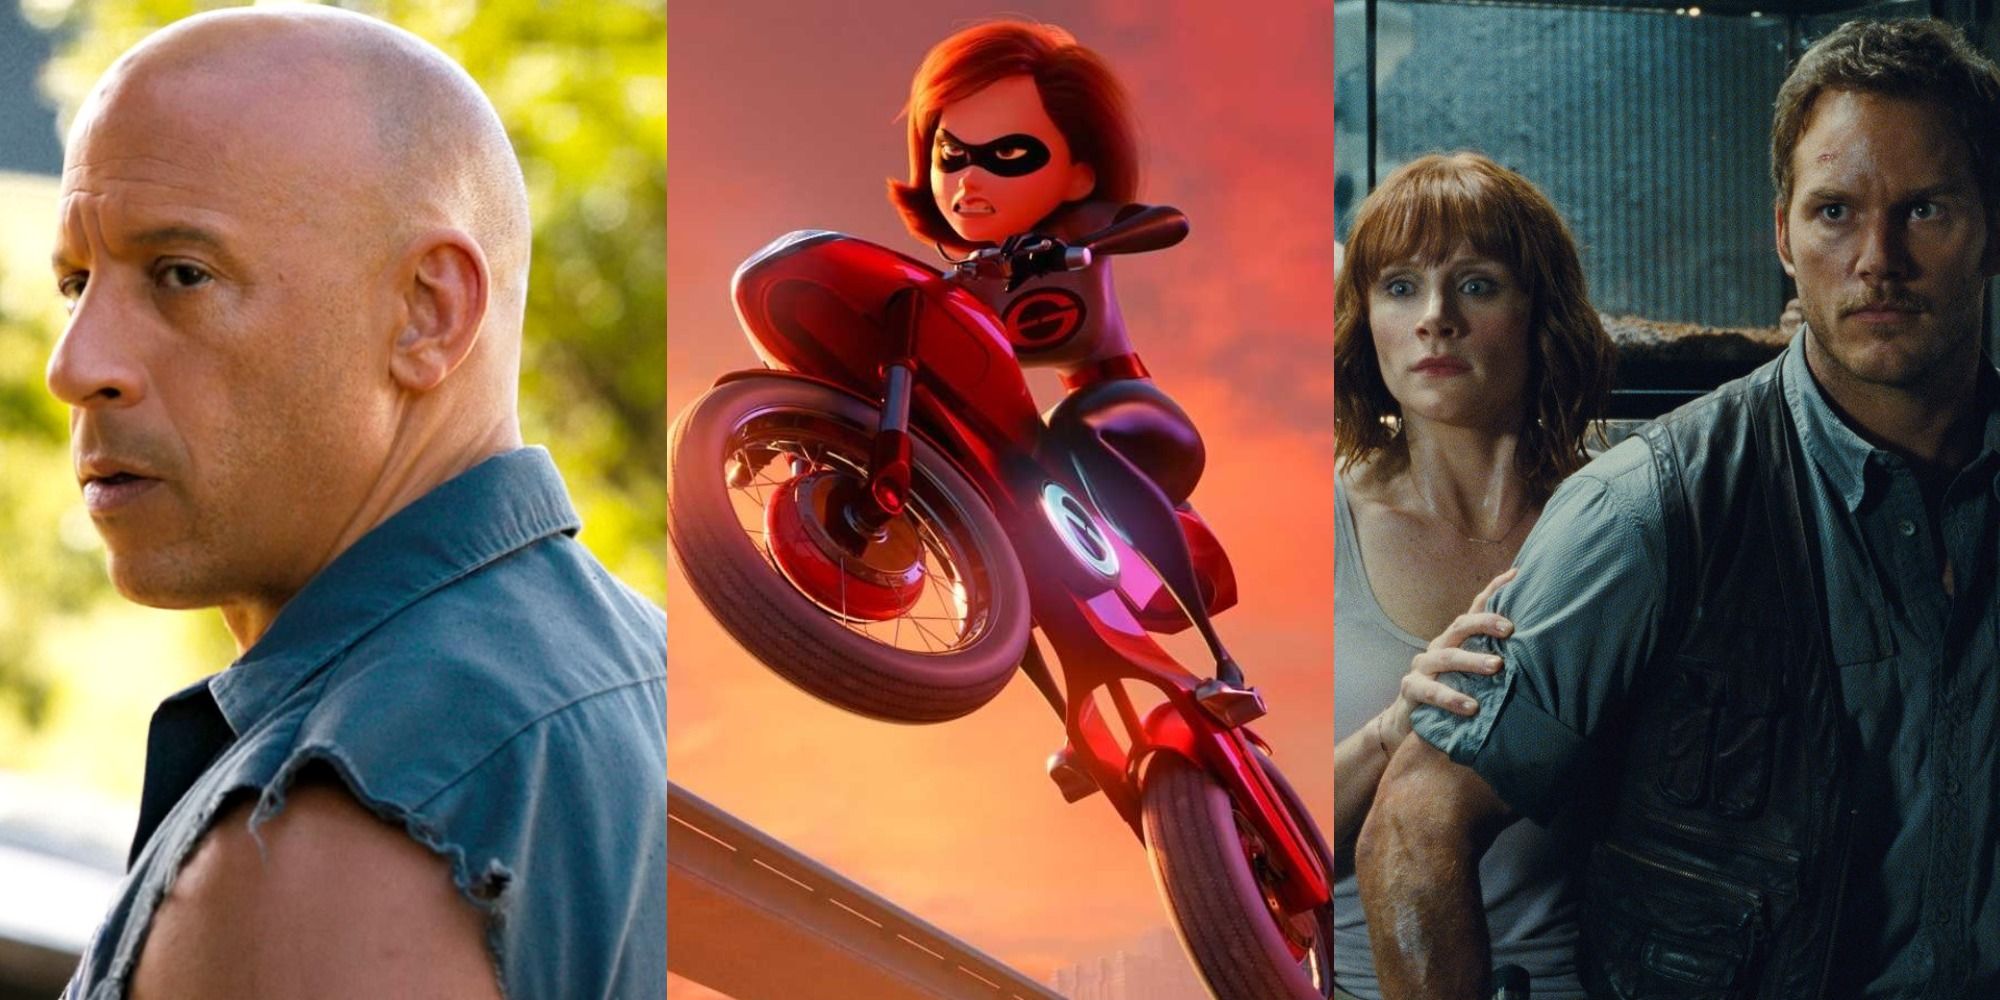 Split image of F9, Incredibles 2 and Jurassic World